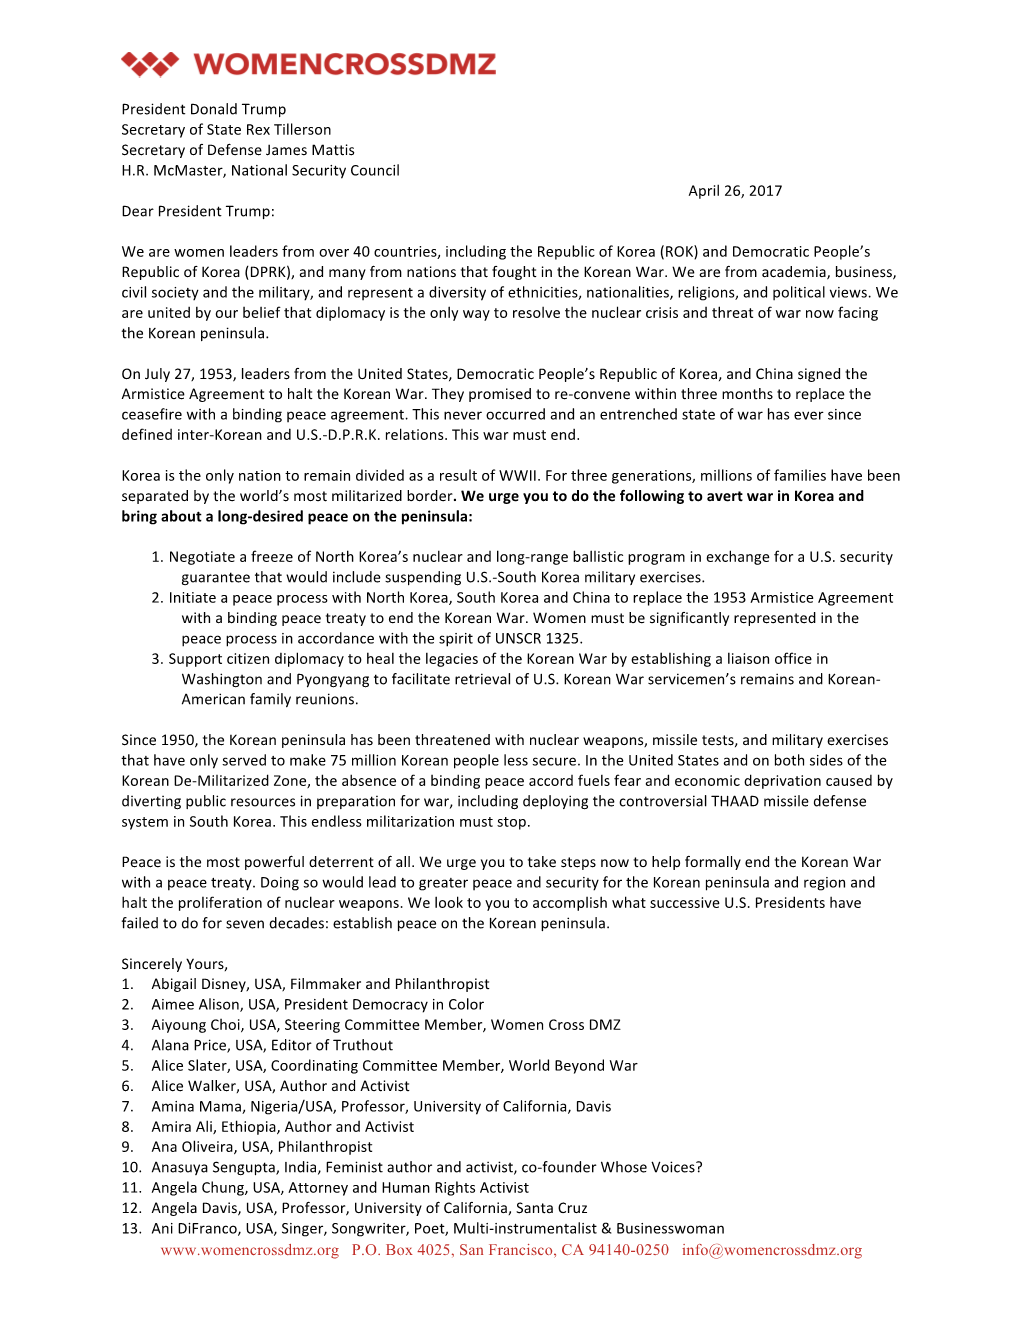 WCDMZ Letter to Trump Administration